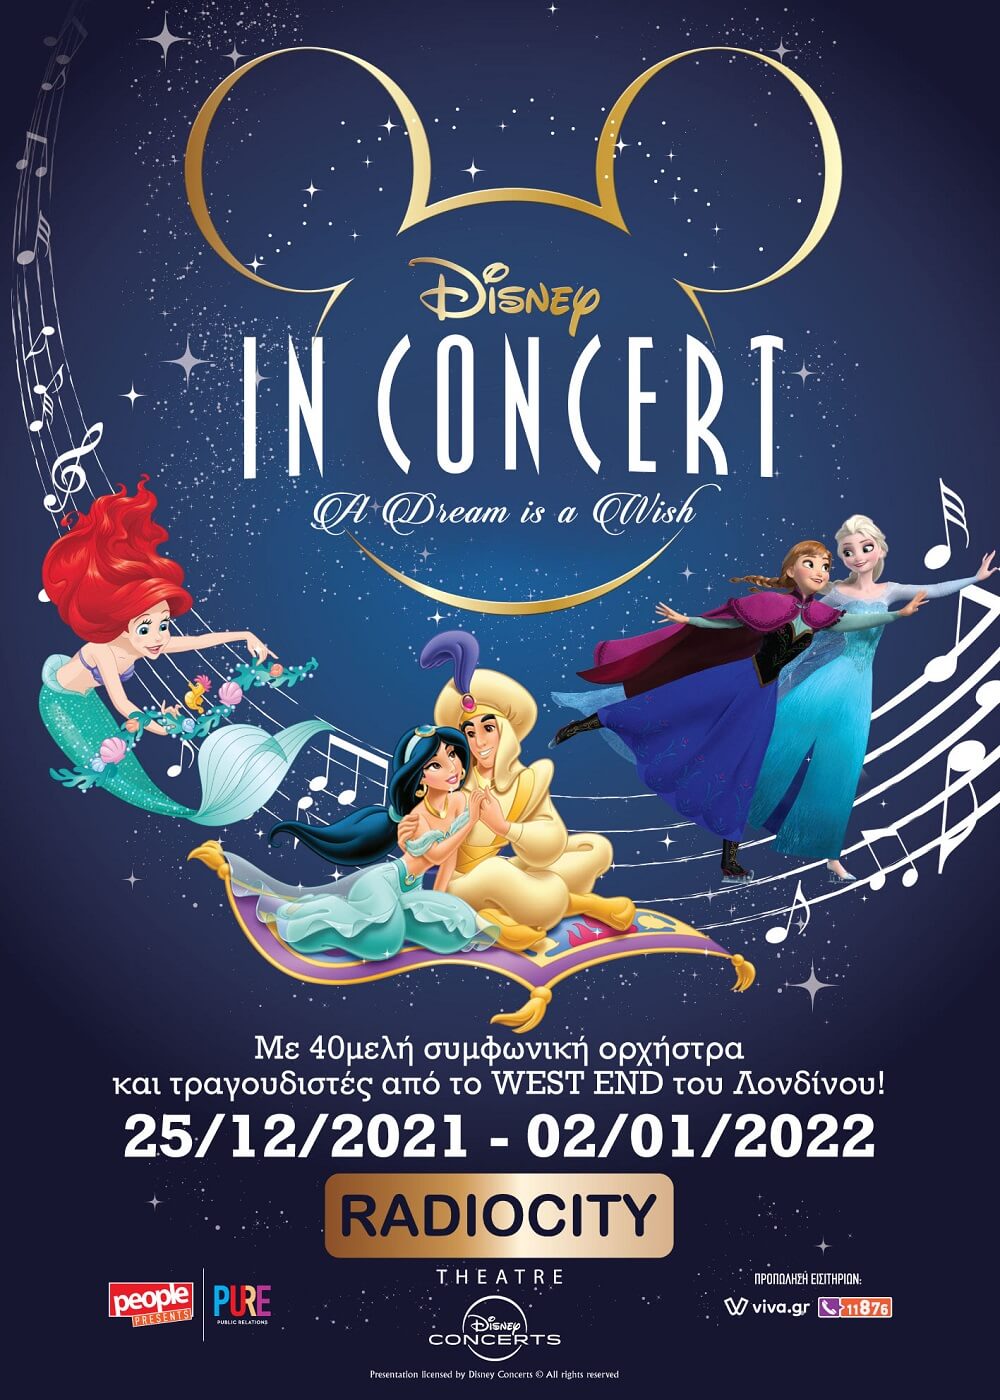 Disney in Concert “A dream is a wish”